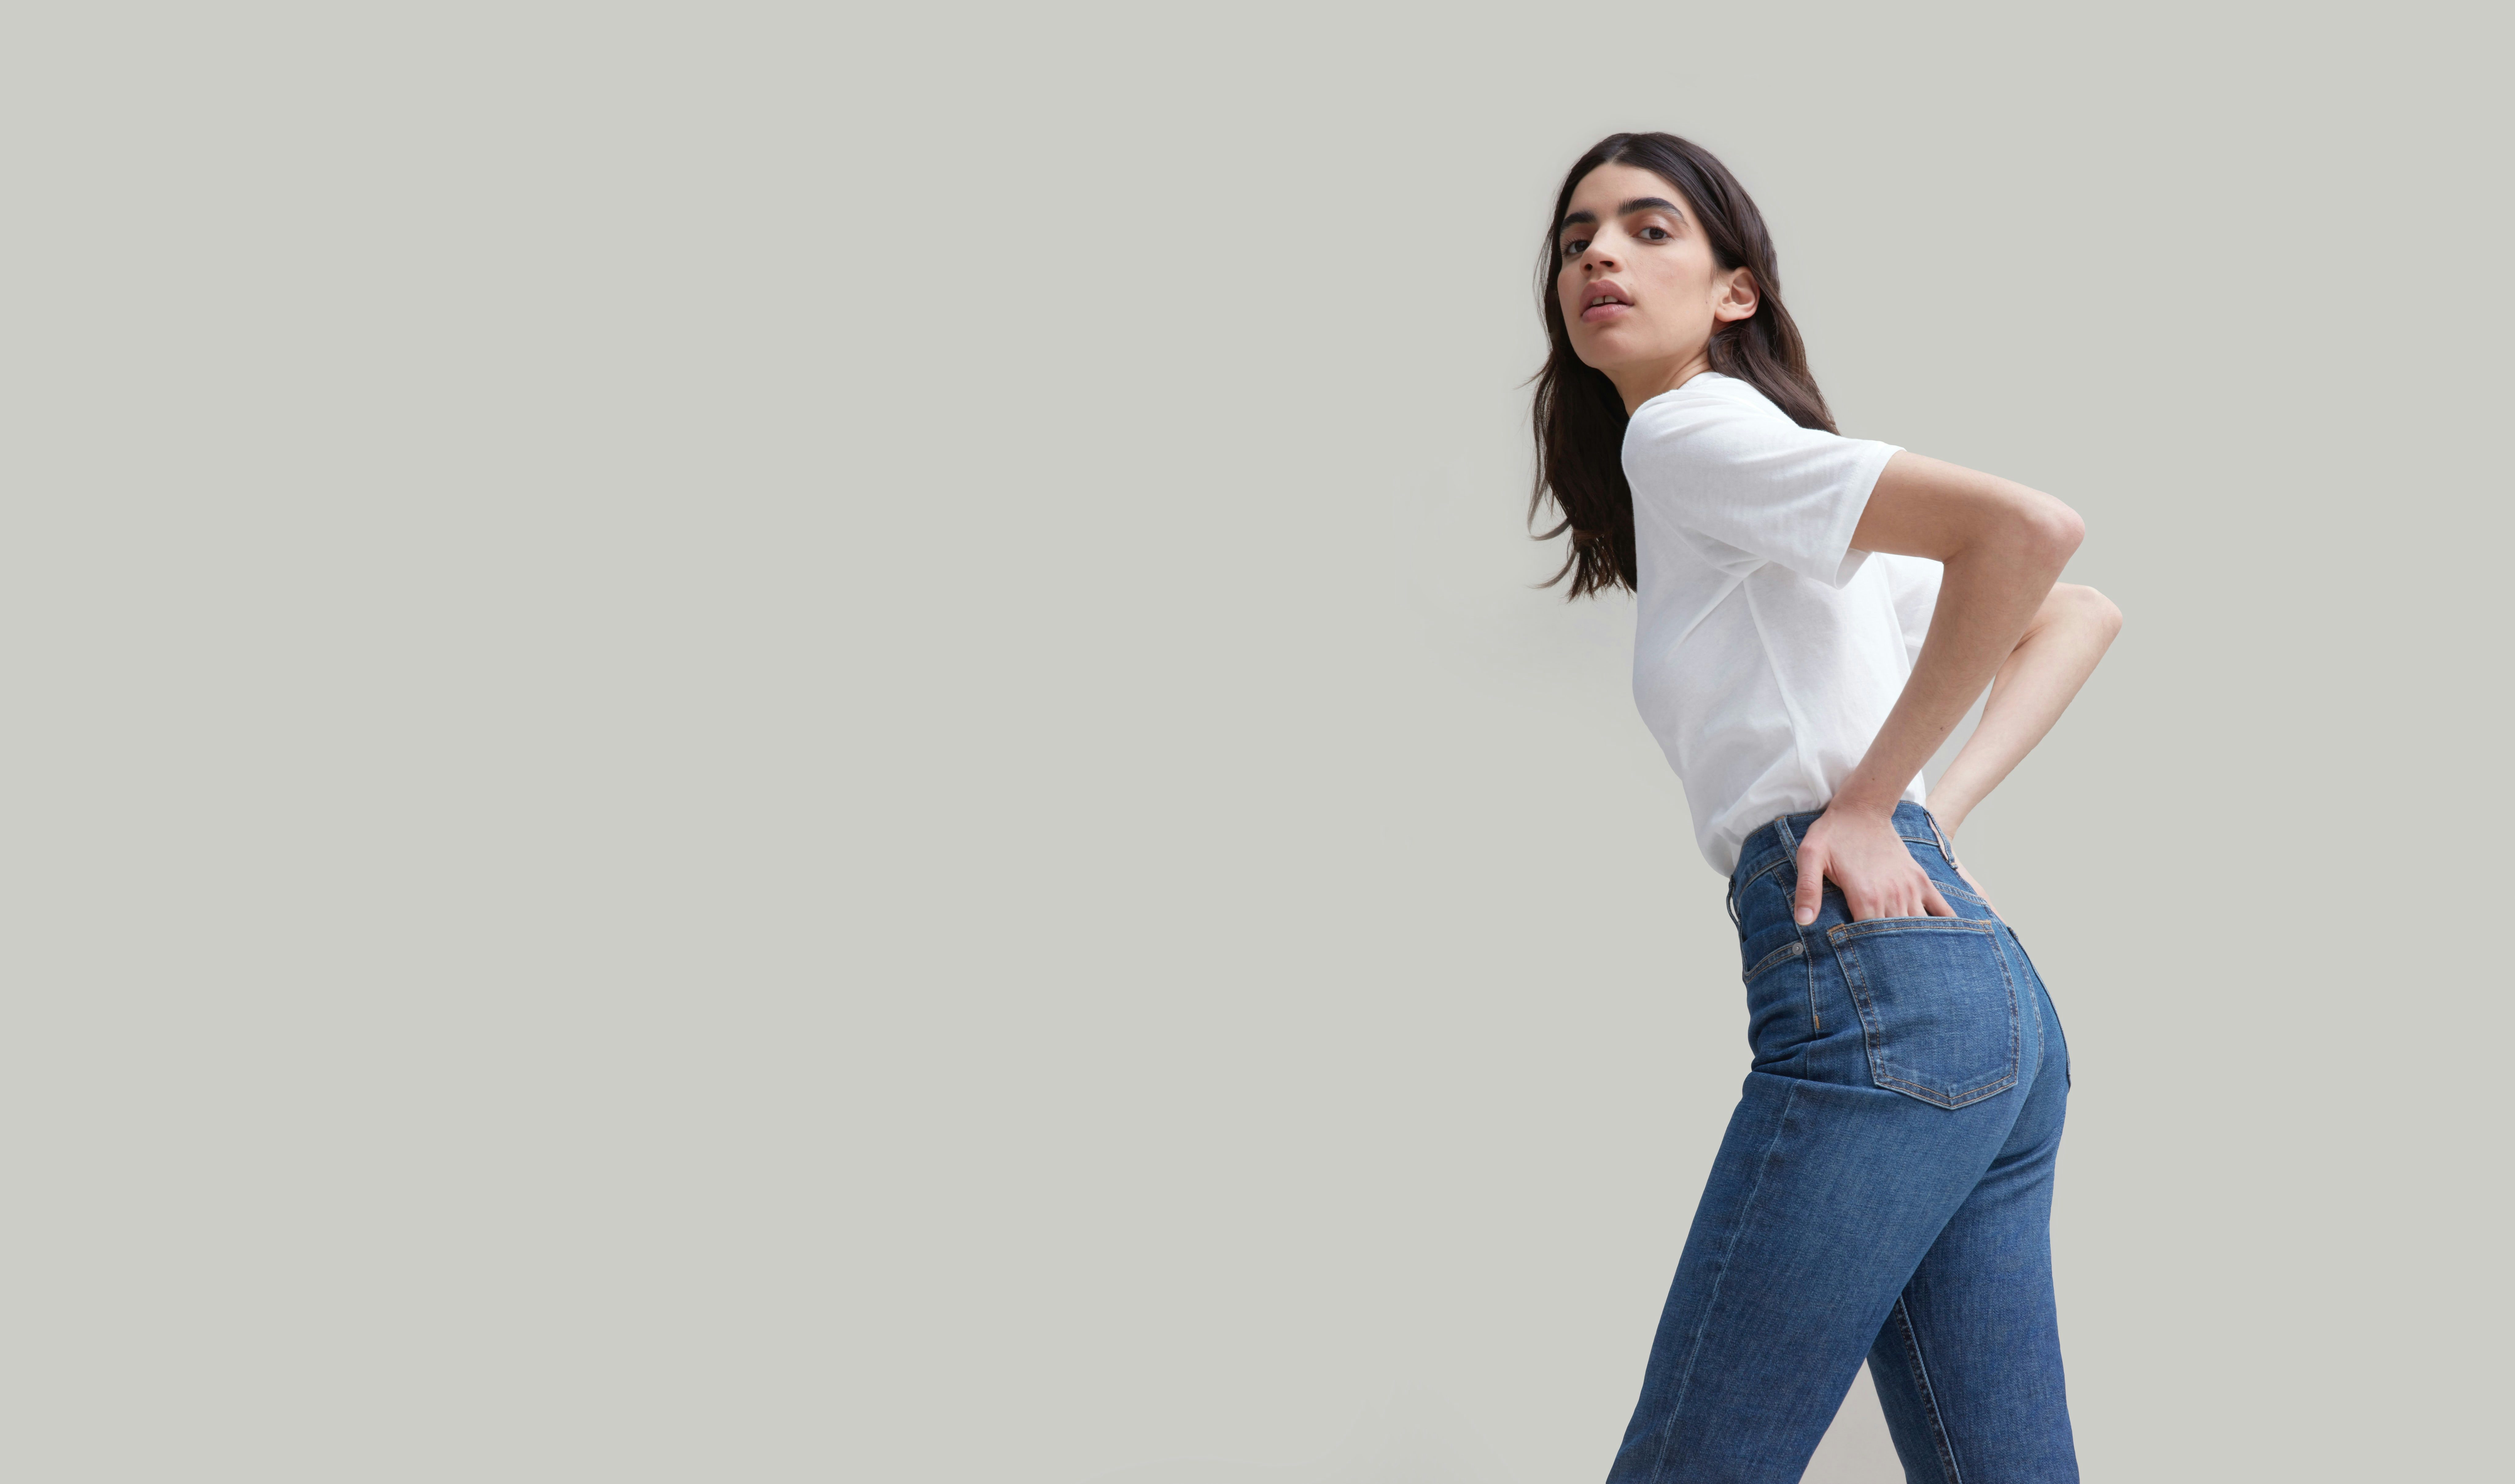 Everlane announced a commitment to only source organic cotton by 2023 last March. Everlane.